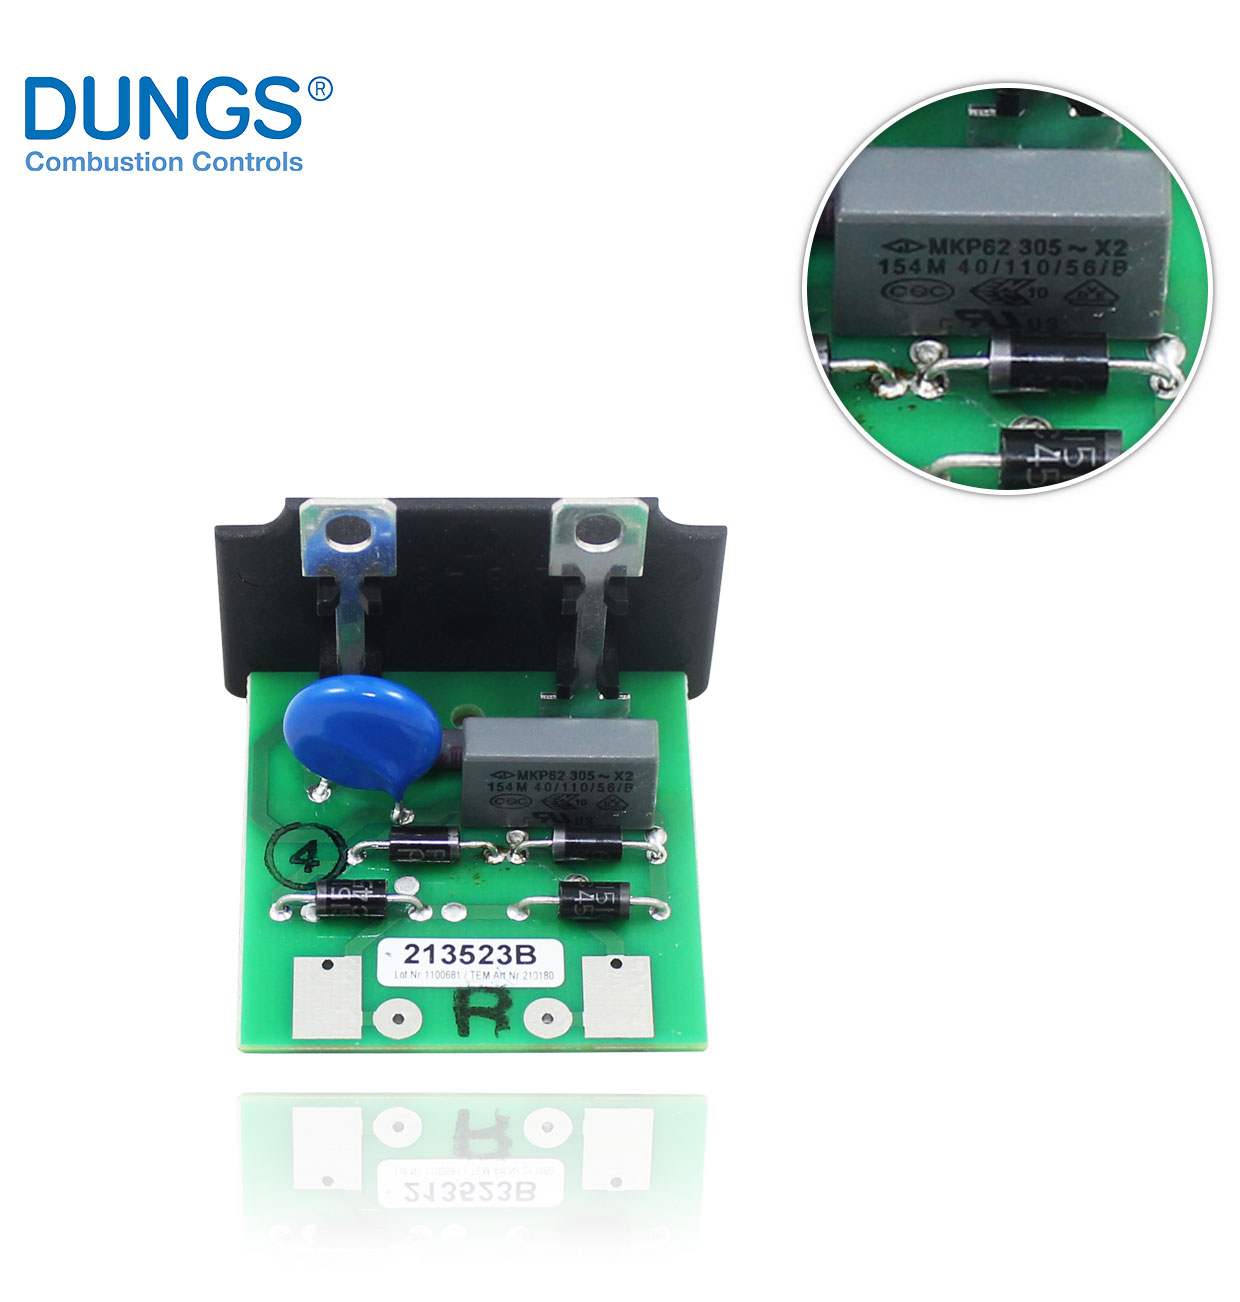 DUNGS 231412RECTIFIER KIT FOR COIL NO. 100-550